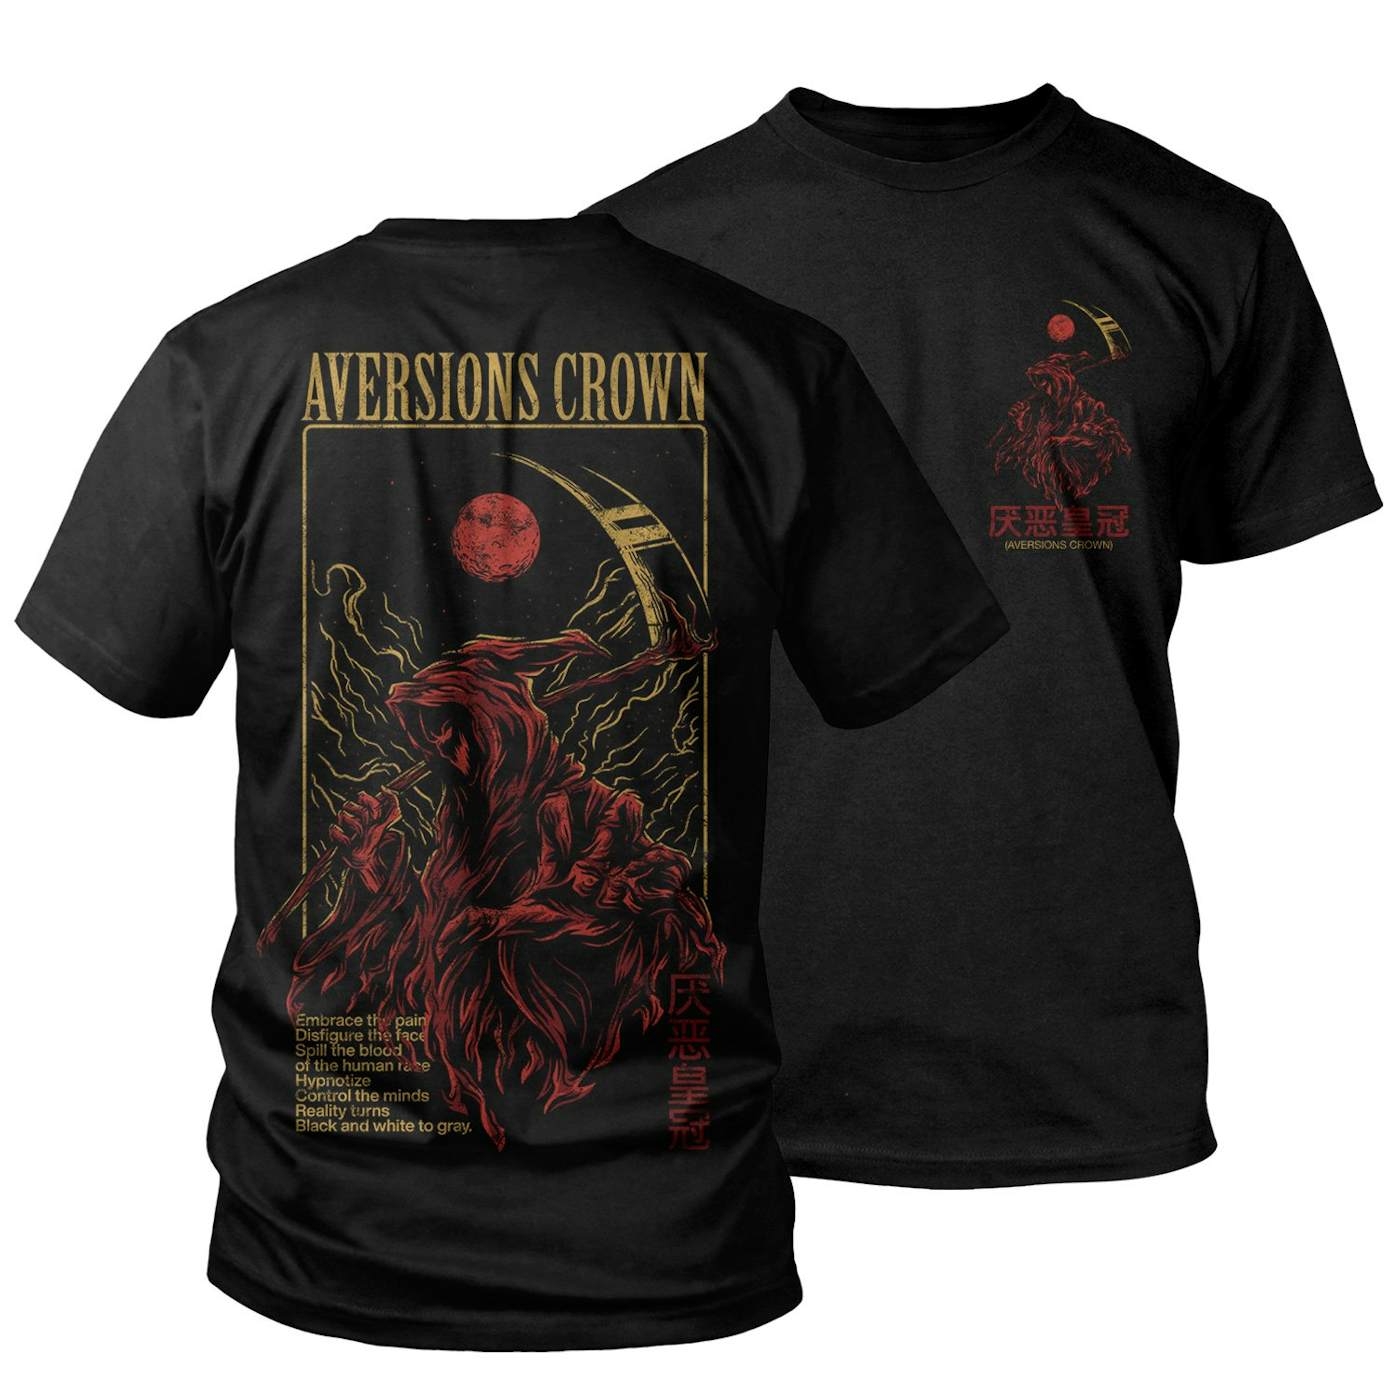 Aversions Crown "Red Reaper" T-Shirt